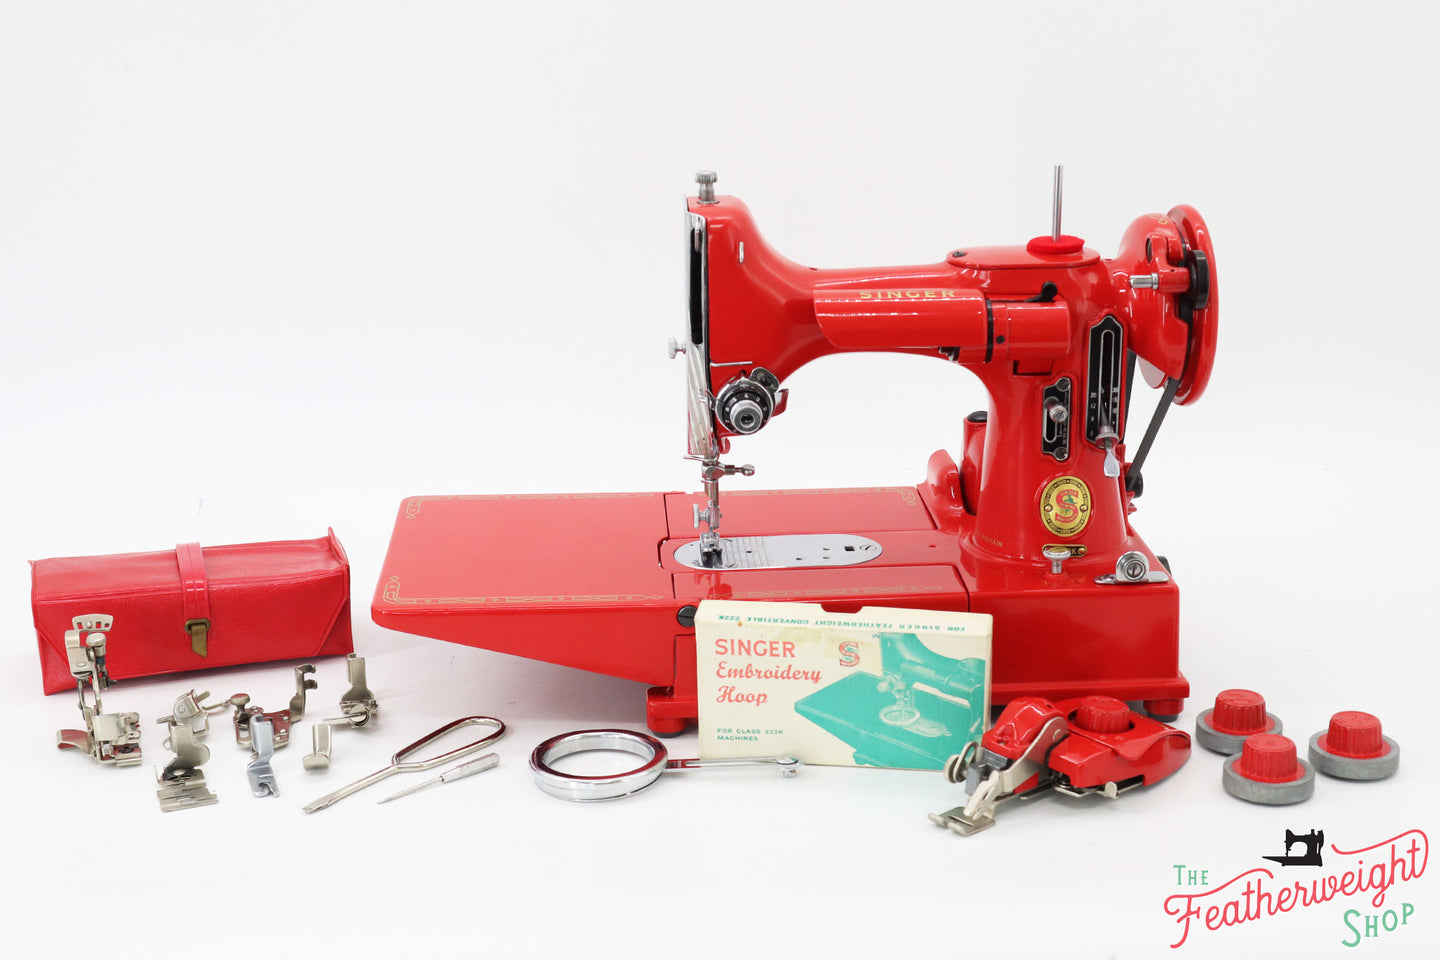 Singer sewing machine Traditional 2282 for sale in Co. Wexford for €120 on  DoneDeal